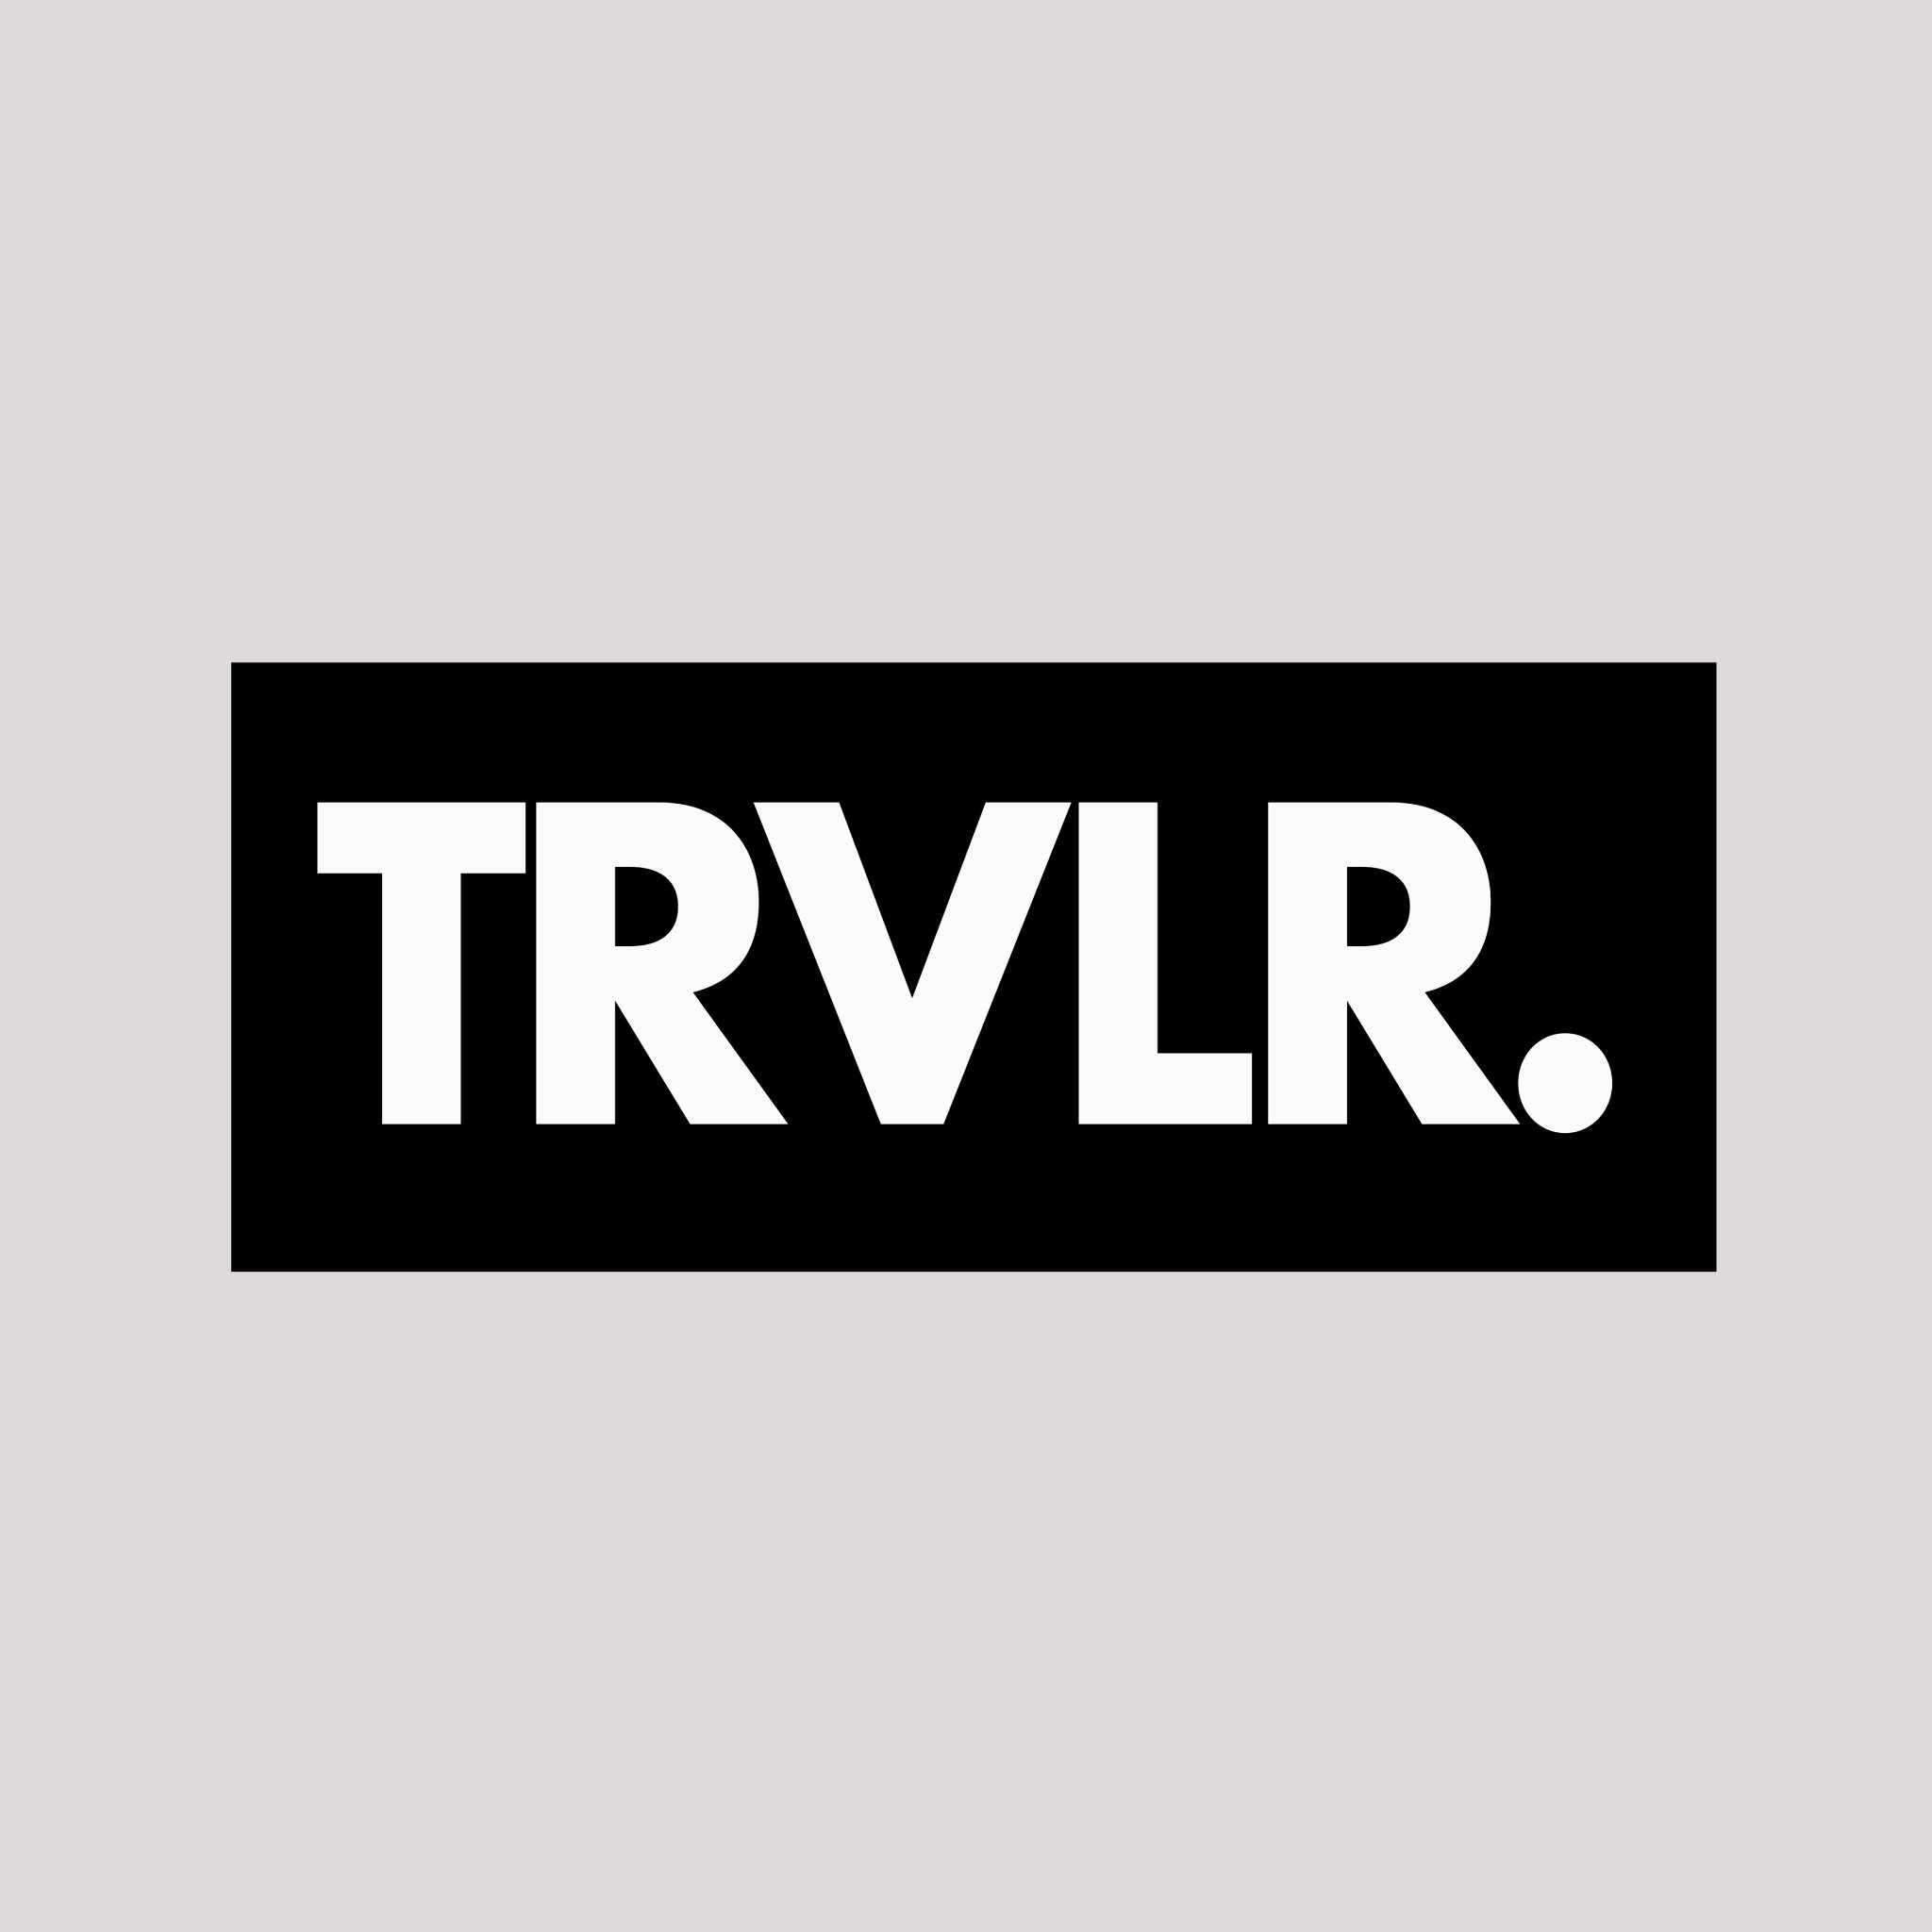 Exclusive designs for travel lovers. TRVLR. is how I share my favorite travel-inspired  images, quotes and observations. https://t.co/bbyQsdgIyy